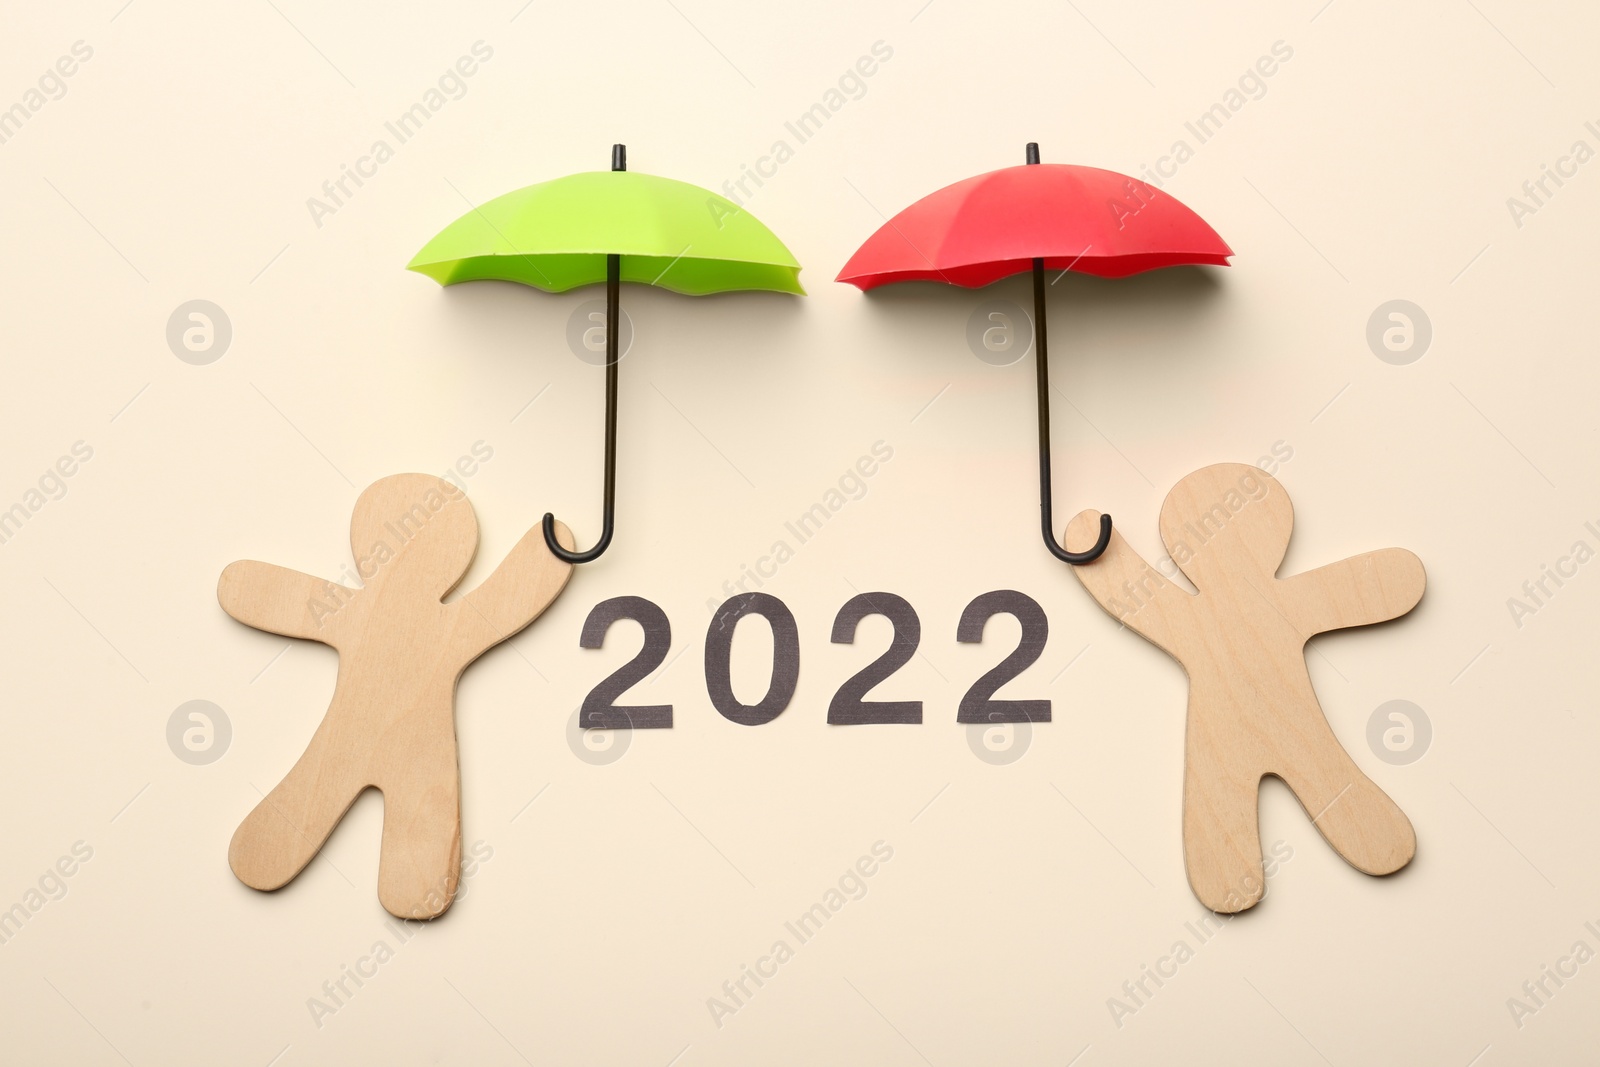 Photo of Mini umbrellas, figures of people and number 2022 on beige background, flat lay